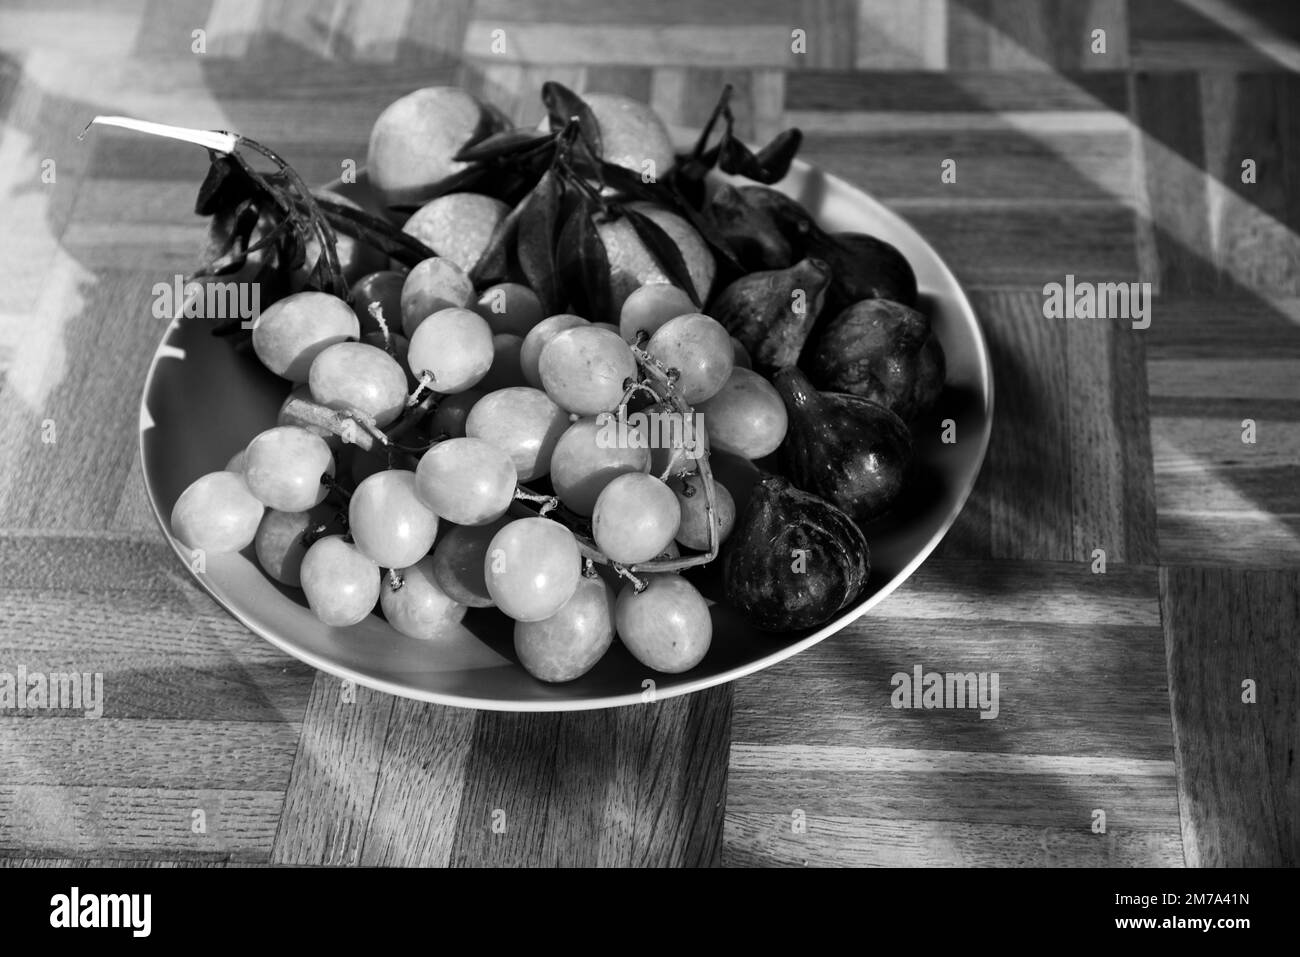 Different organic fruits from the local farmer market on plate on old rustic wooden surface.  Seasonal fruit background. Black white photography Stock Photo